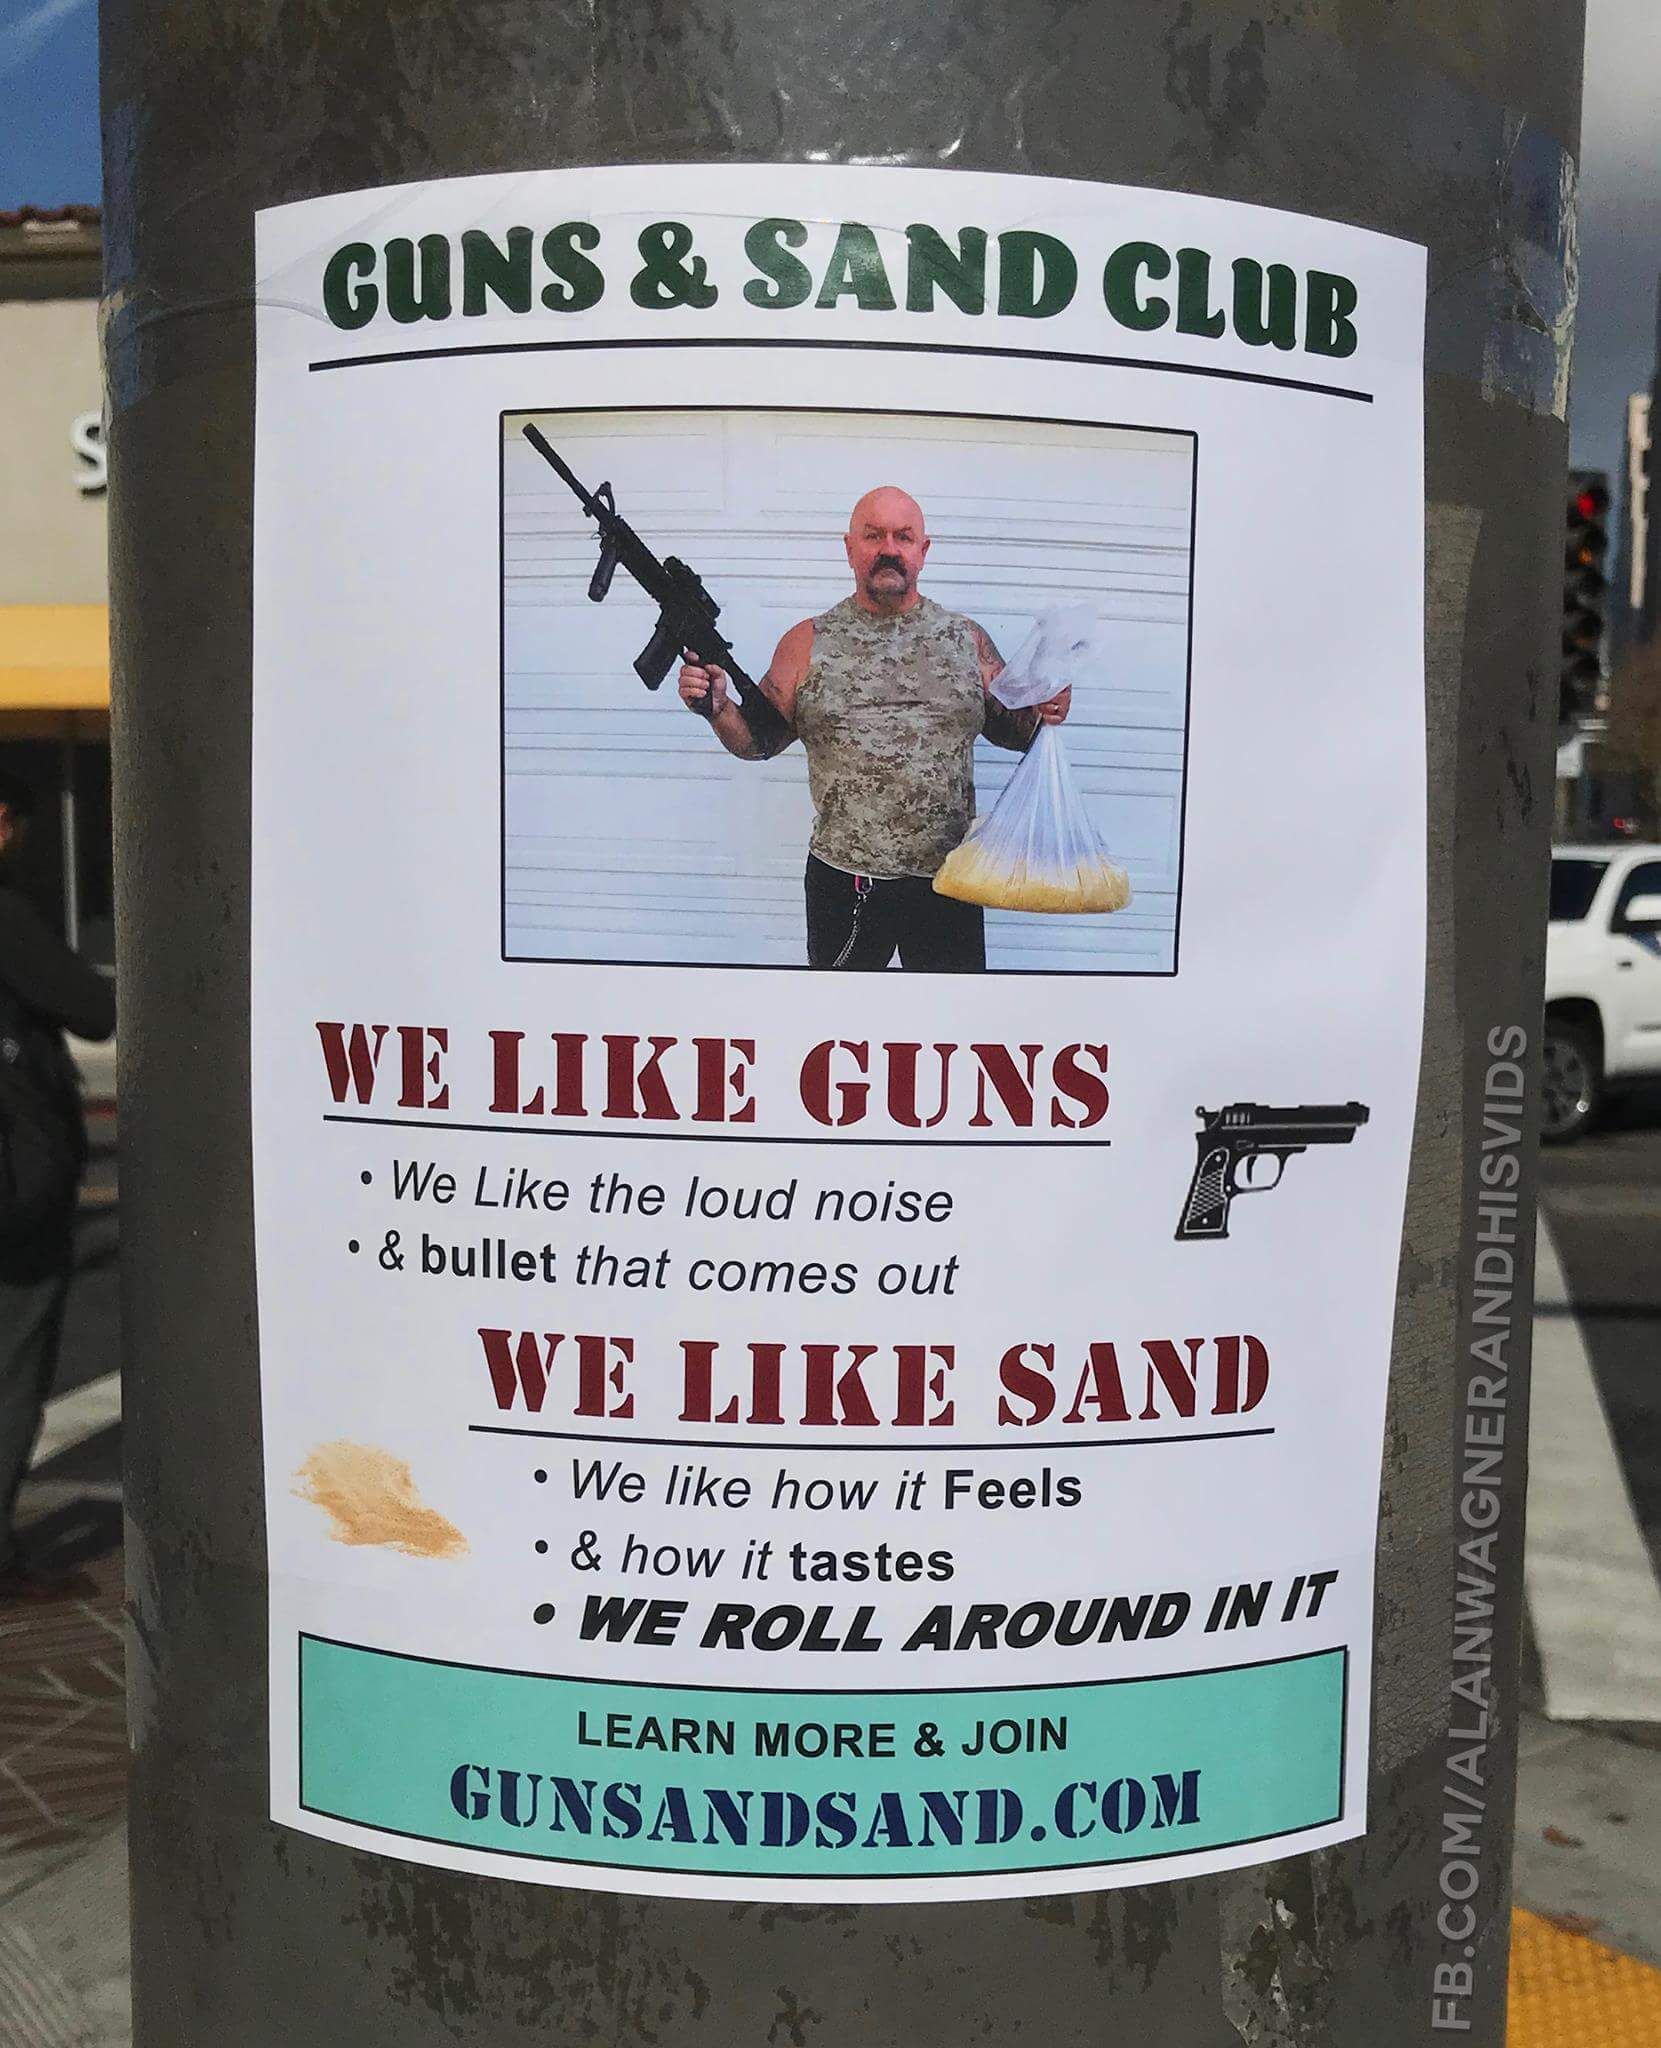 guns and sand club - Guns & Sand Club We Guns We the loud noise & bullet that comes out We Sand We how it Feels & how it tastes We Roll Around In It Fb.ComAlanwagnerandhisvids Learn More & Join Gunsandsand.Com